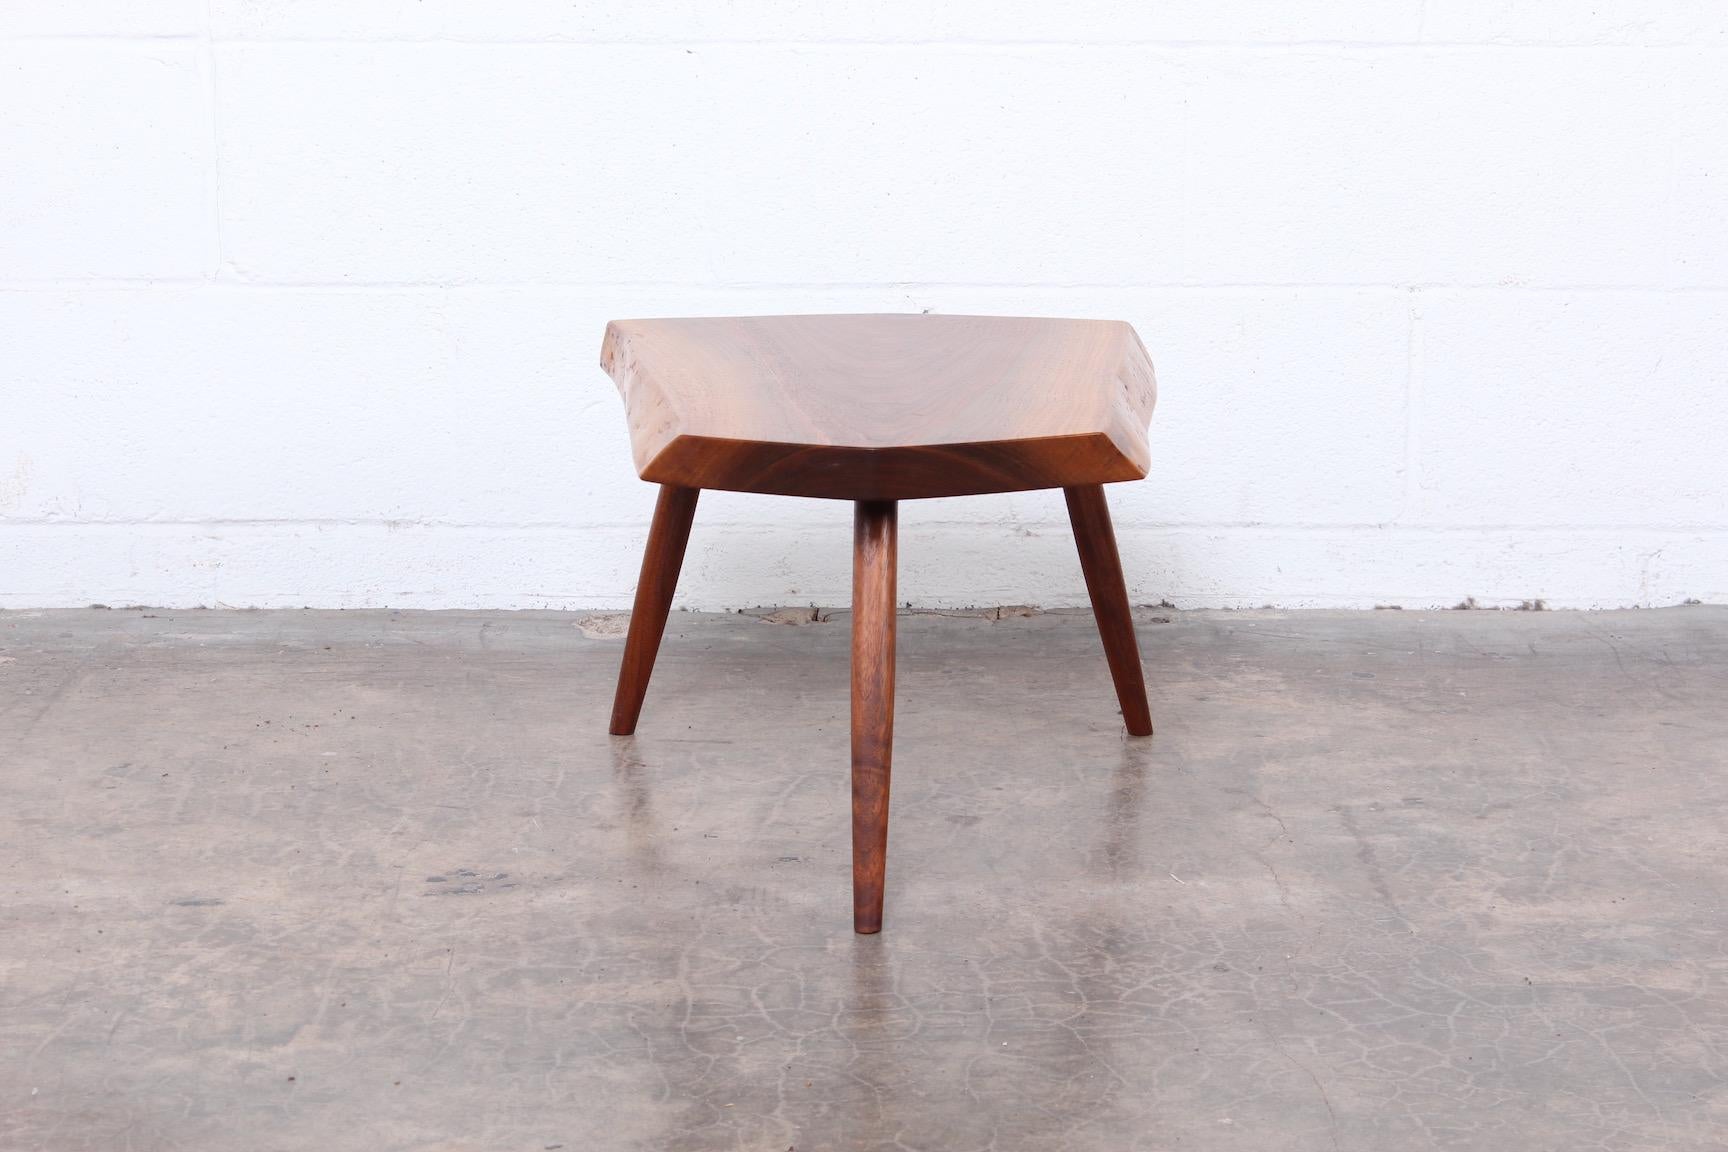 Walnut side table by George Nakashima signed and dated 1989.
    